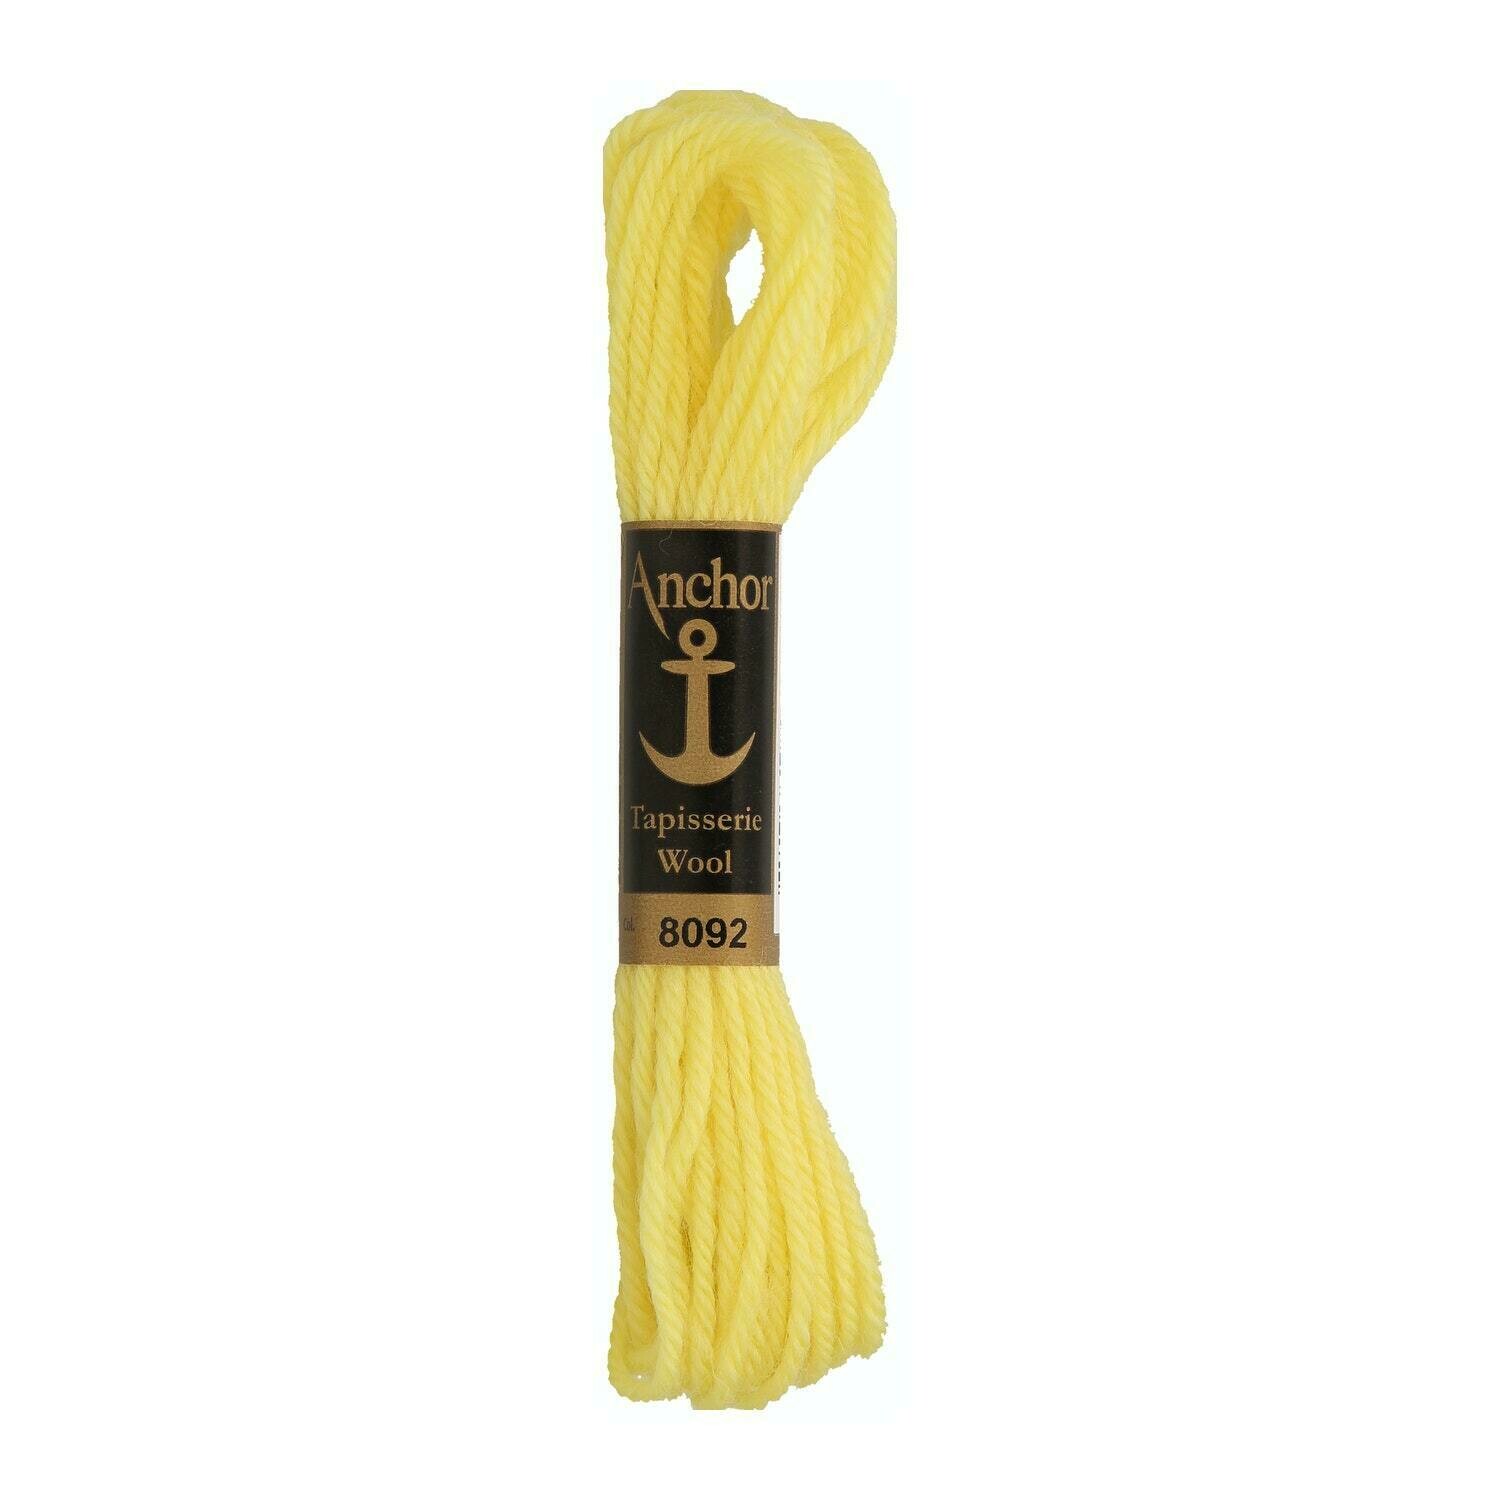 Anchor Tapisserie Wool #08092